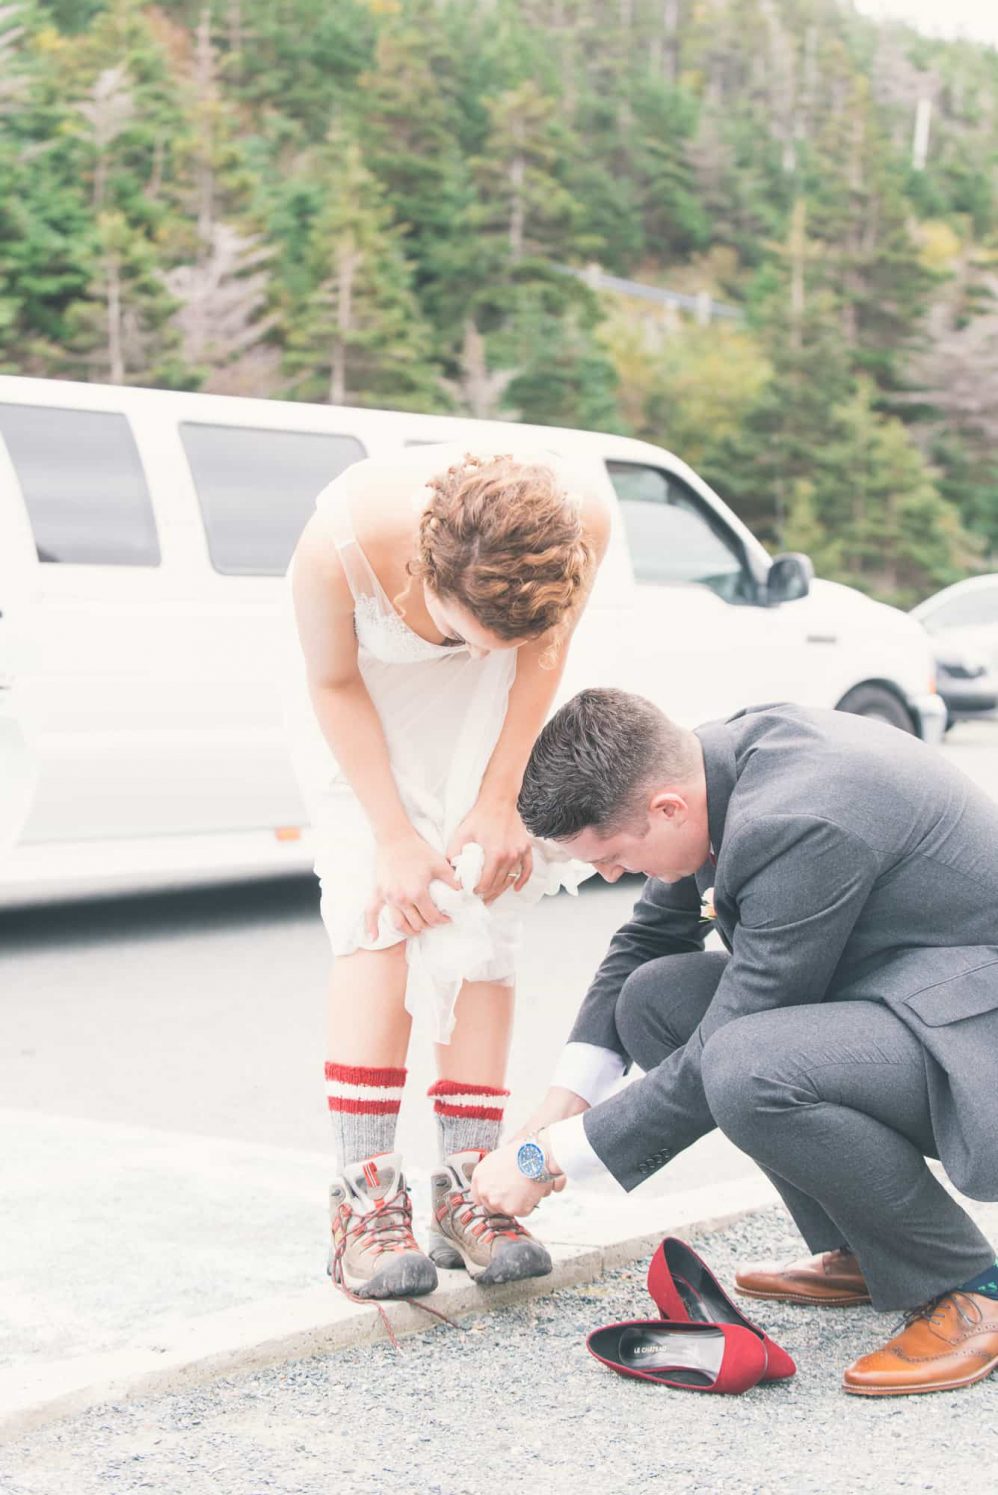 A groom aides his bride with her shoes.